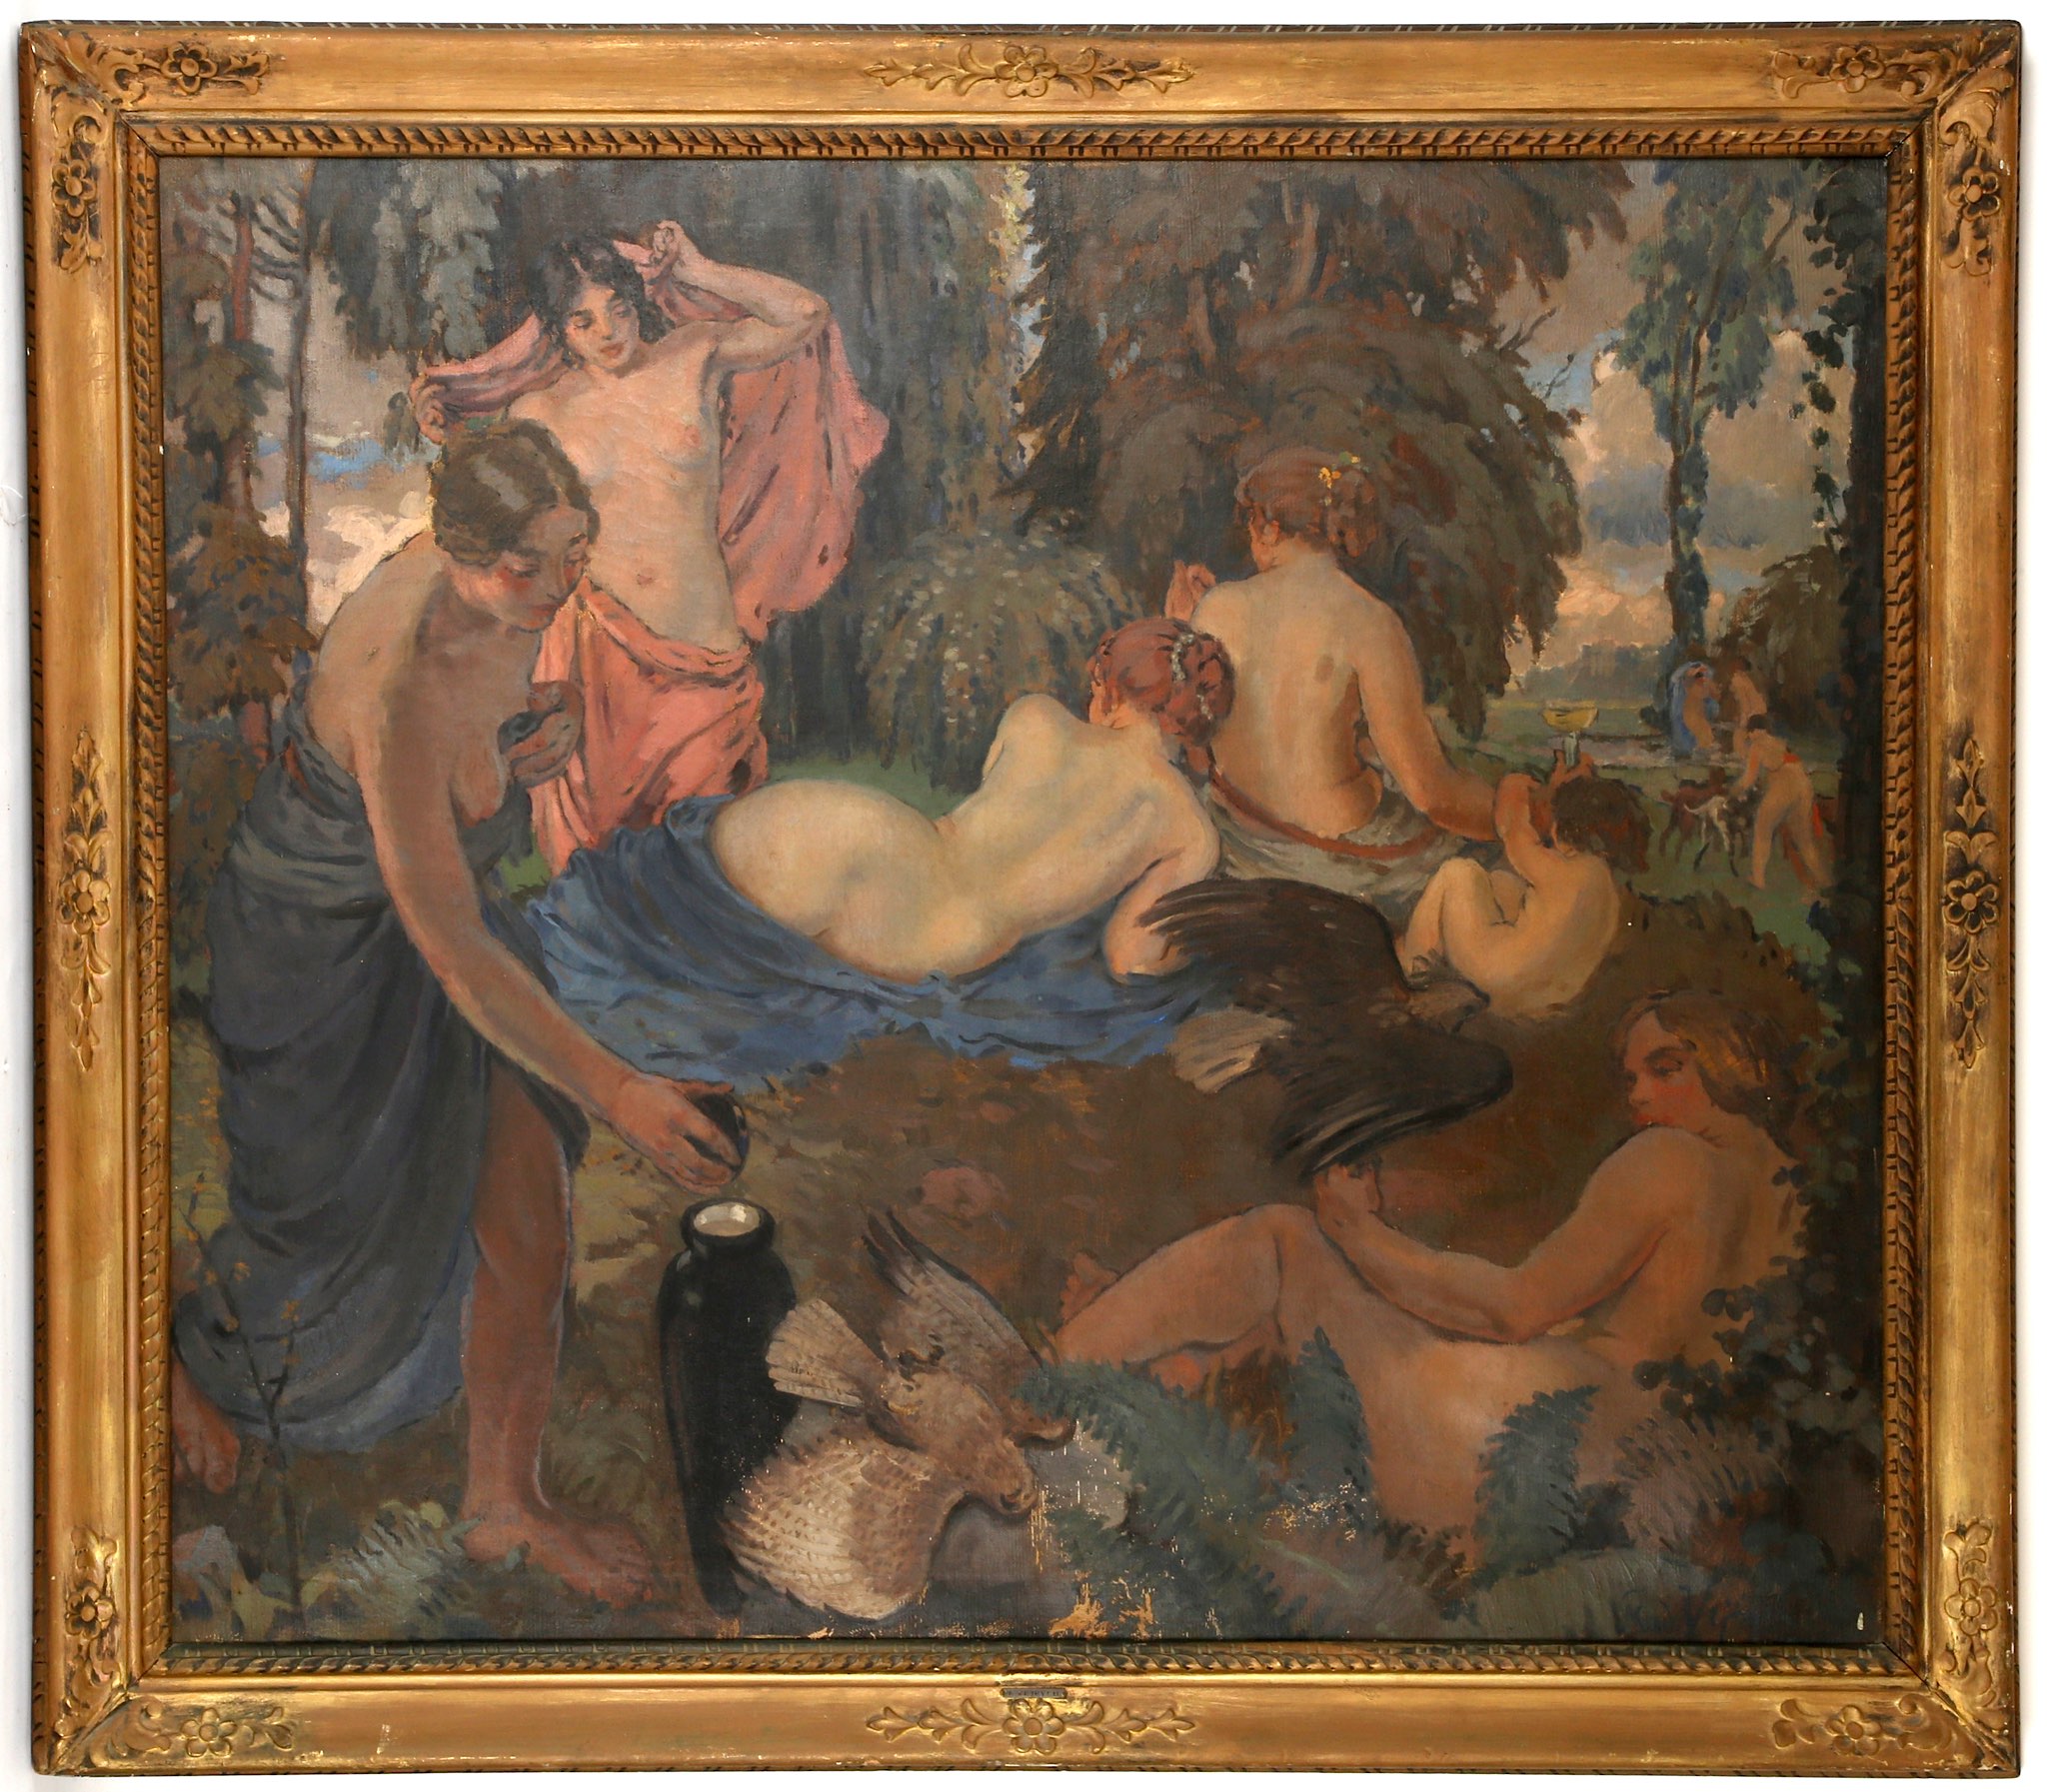 Rudolf Vejrych (Czech; 1882-1939), 'The Goddess and her Nymphs', a large oil on canvas depiction